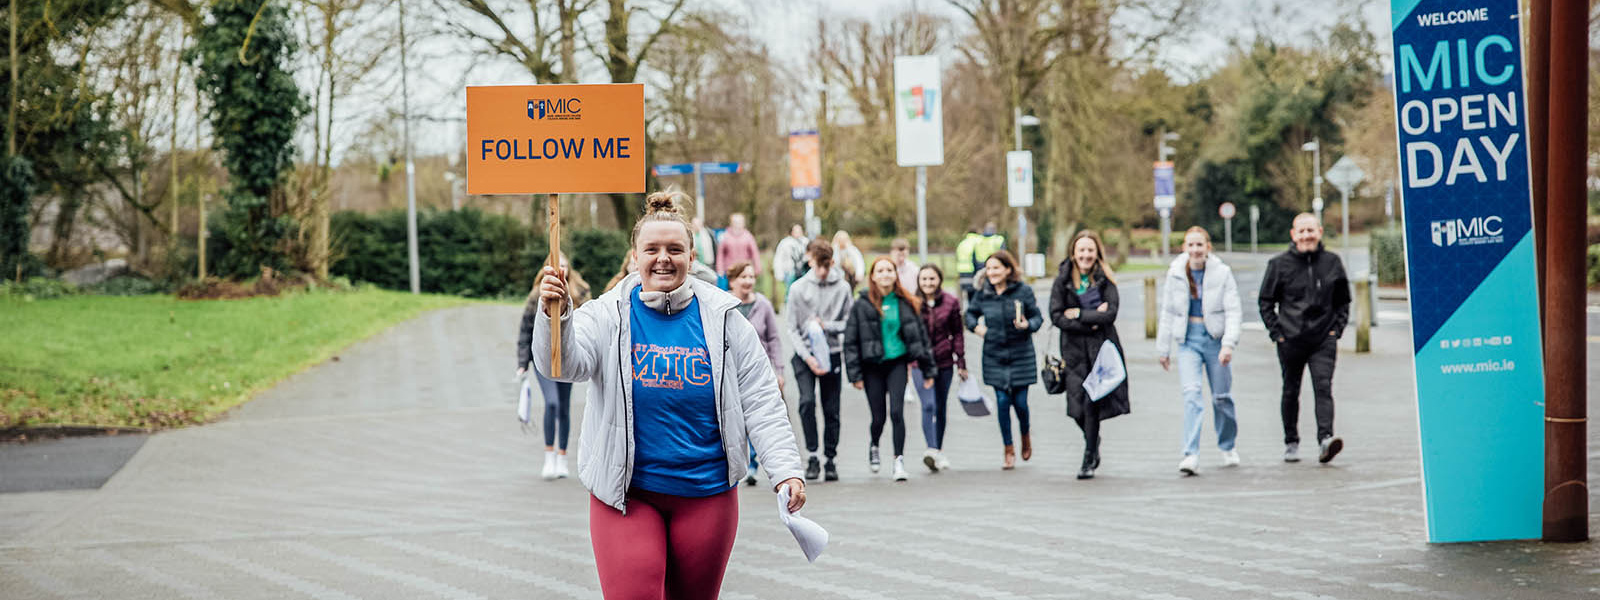 MIC student carrying a Follow Me sign leading a campus tour at college open day.